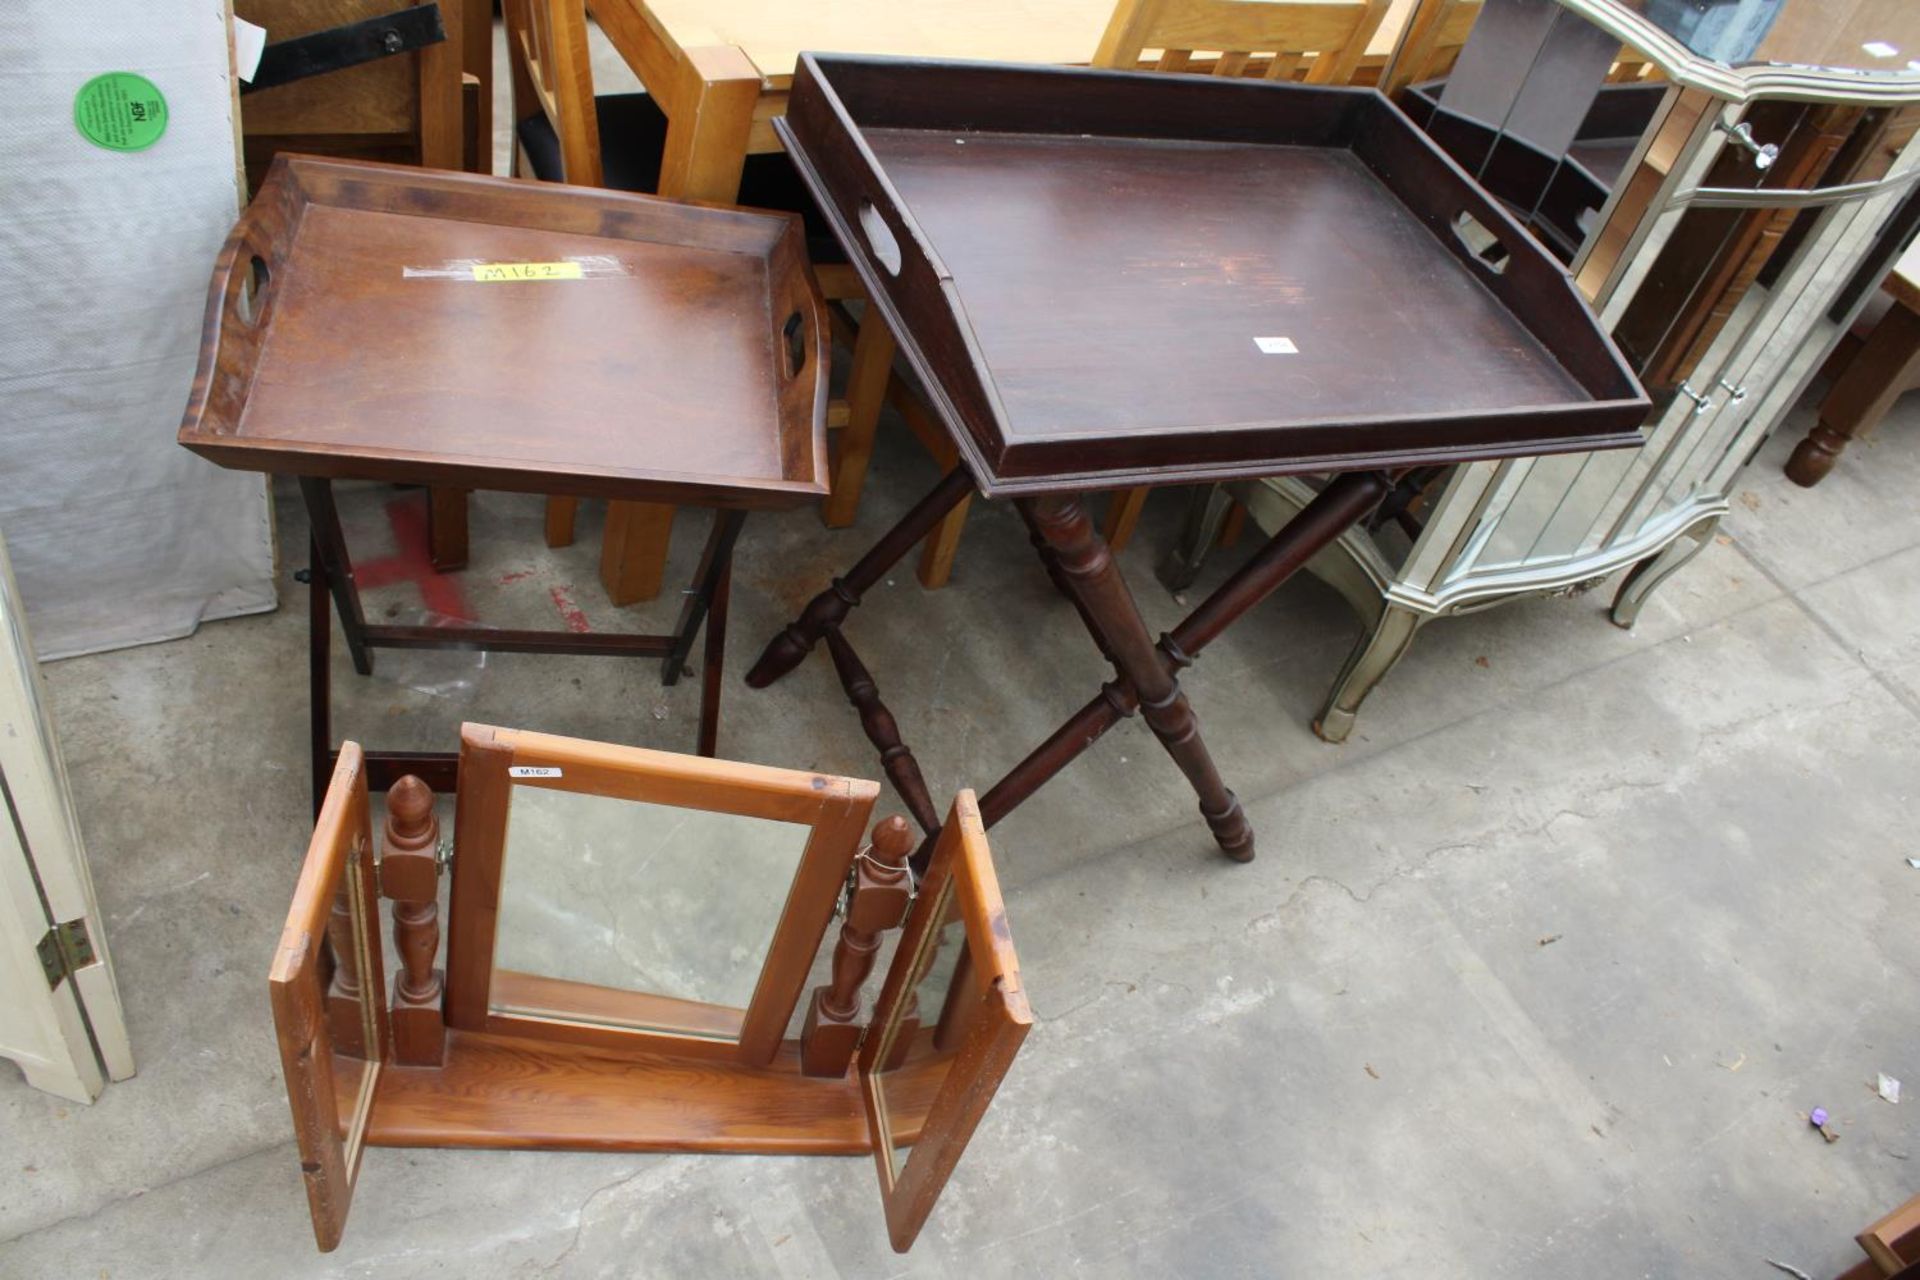 TWO GEORGIAN STYLE BUTLERS TRAYS ON FOLDING STANDS AND A PINE TRIPLE MIRROR